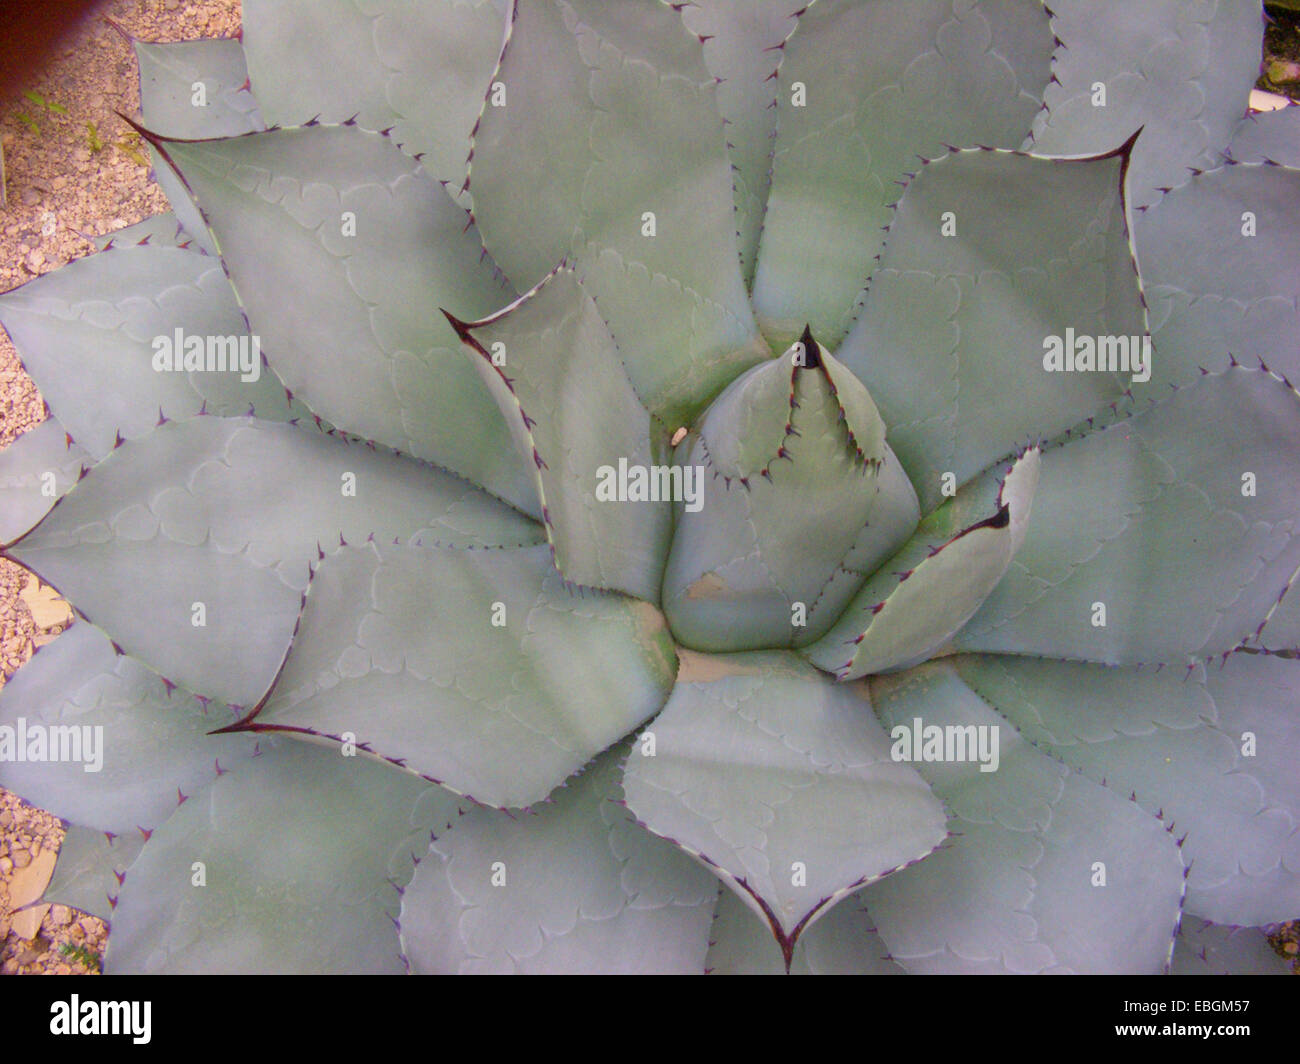 Parry's Agave (Agave parryi), single plant Stock Photo